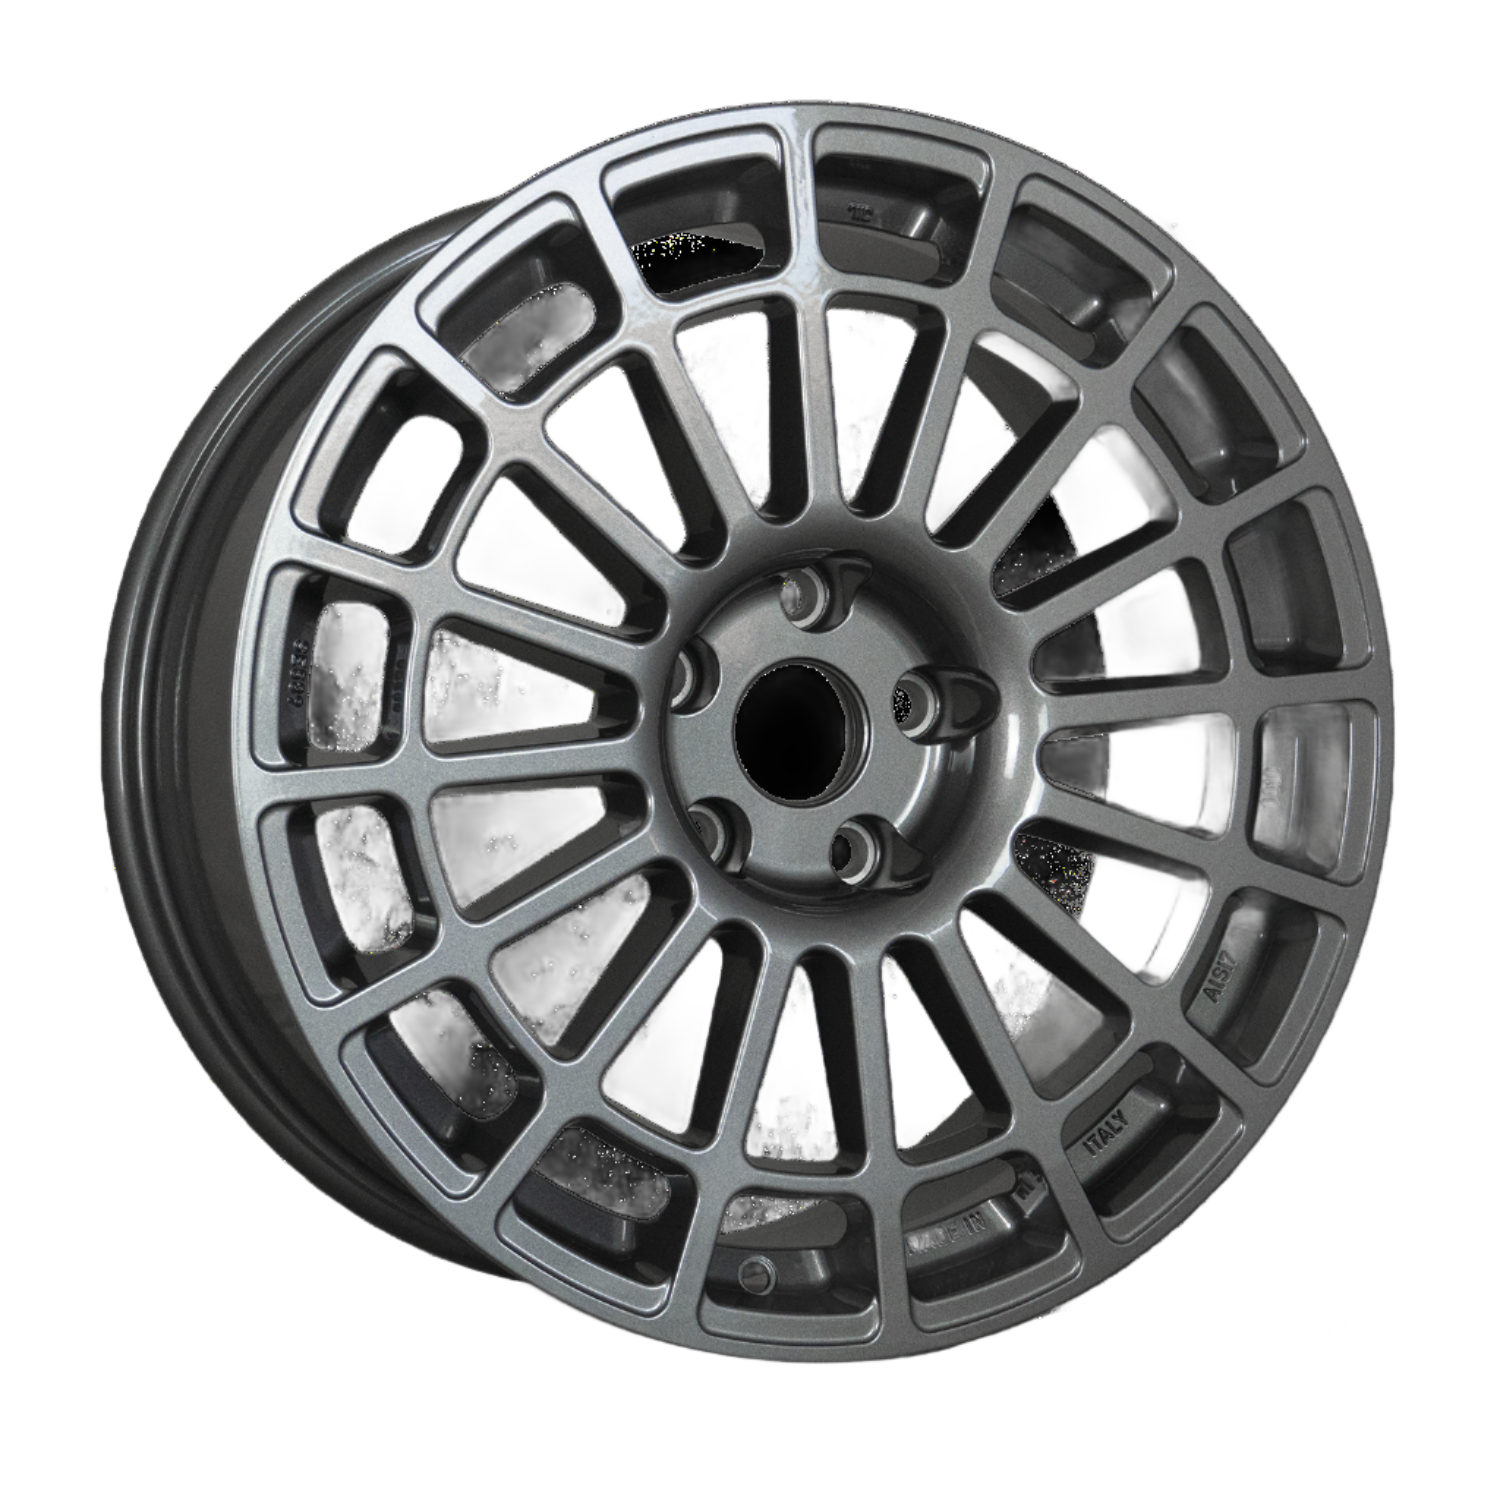 Front view of a Monte Corse 18-inch anthracite wheel with a multi-spoke design against a white background 